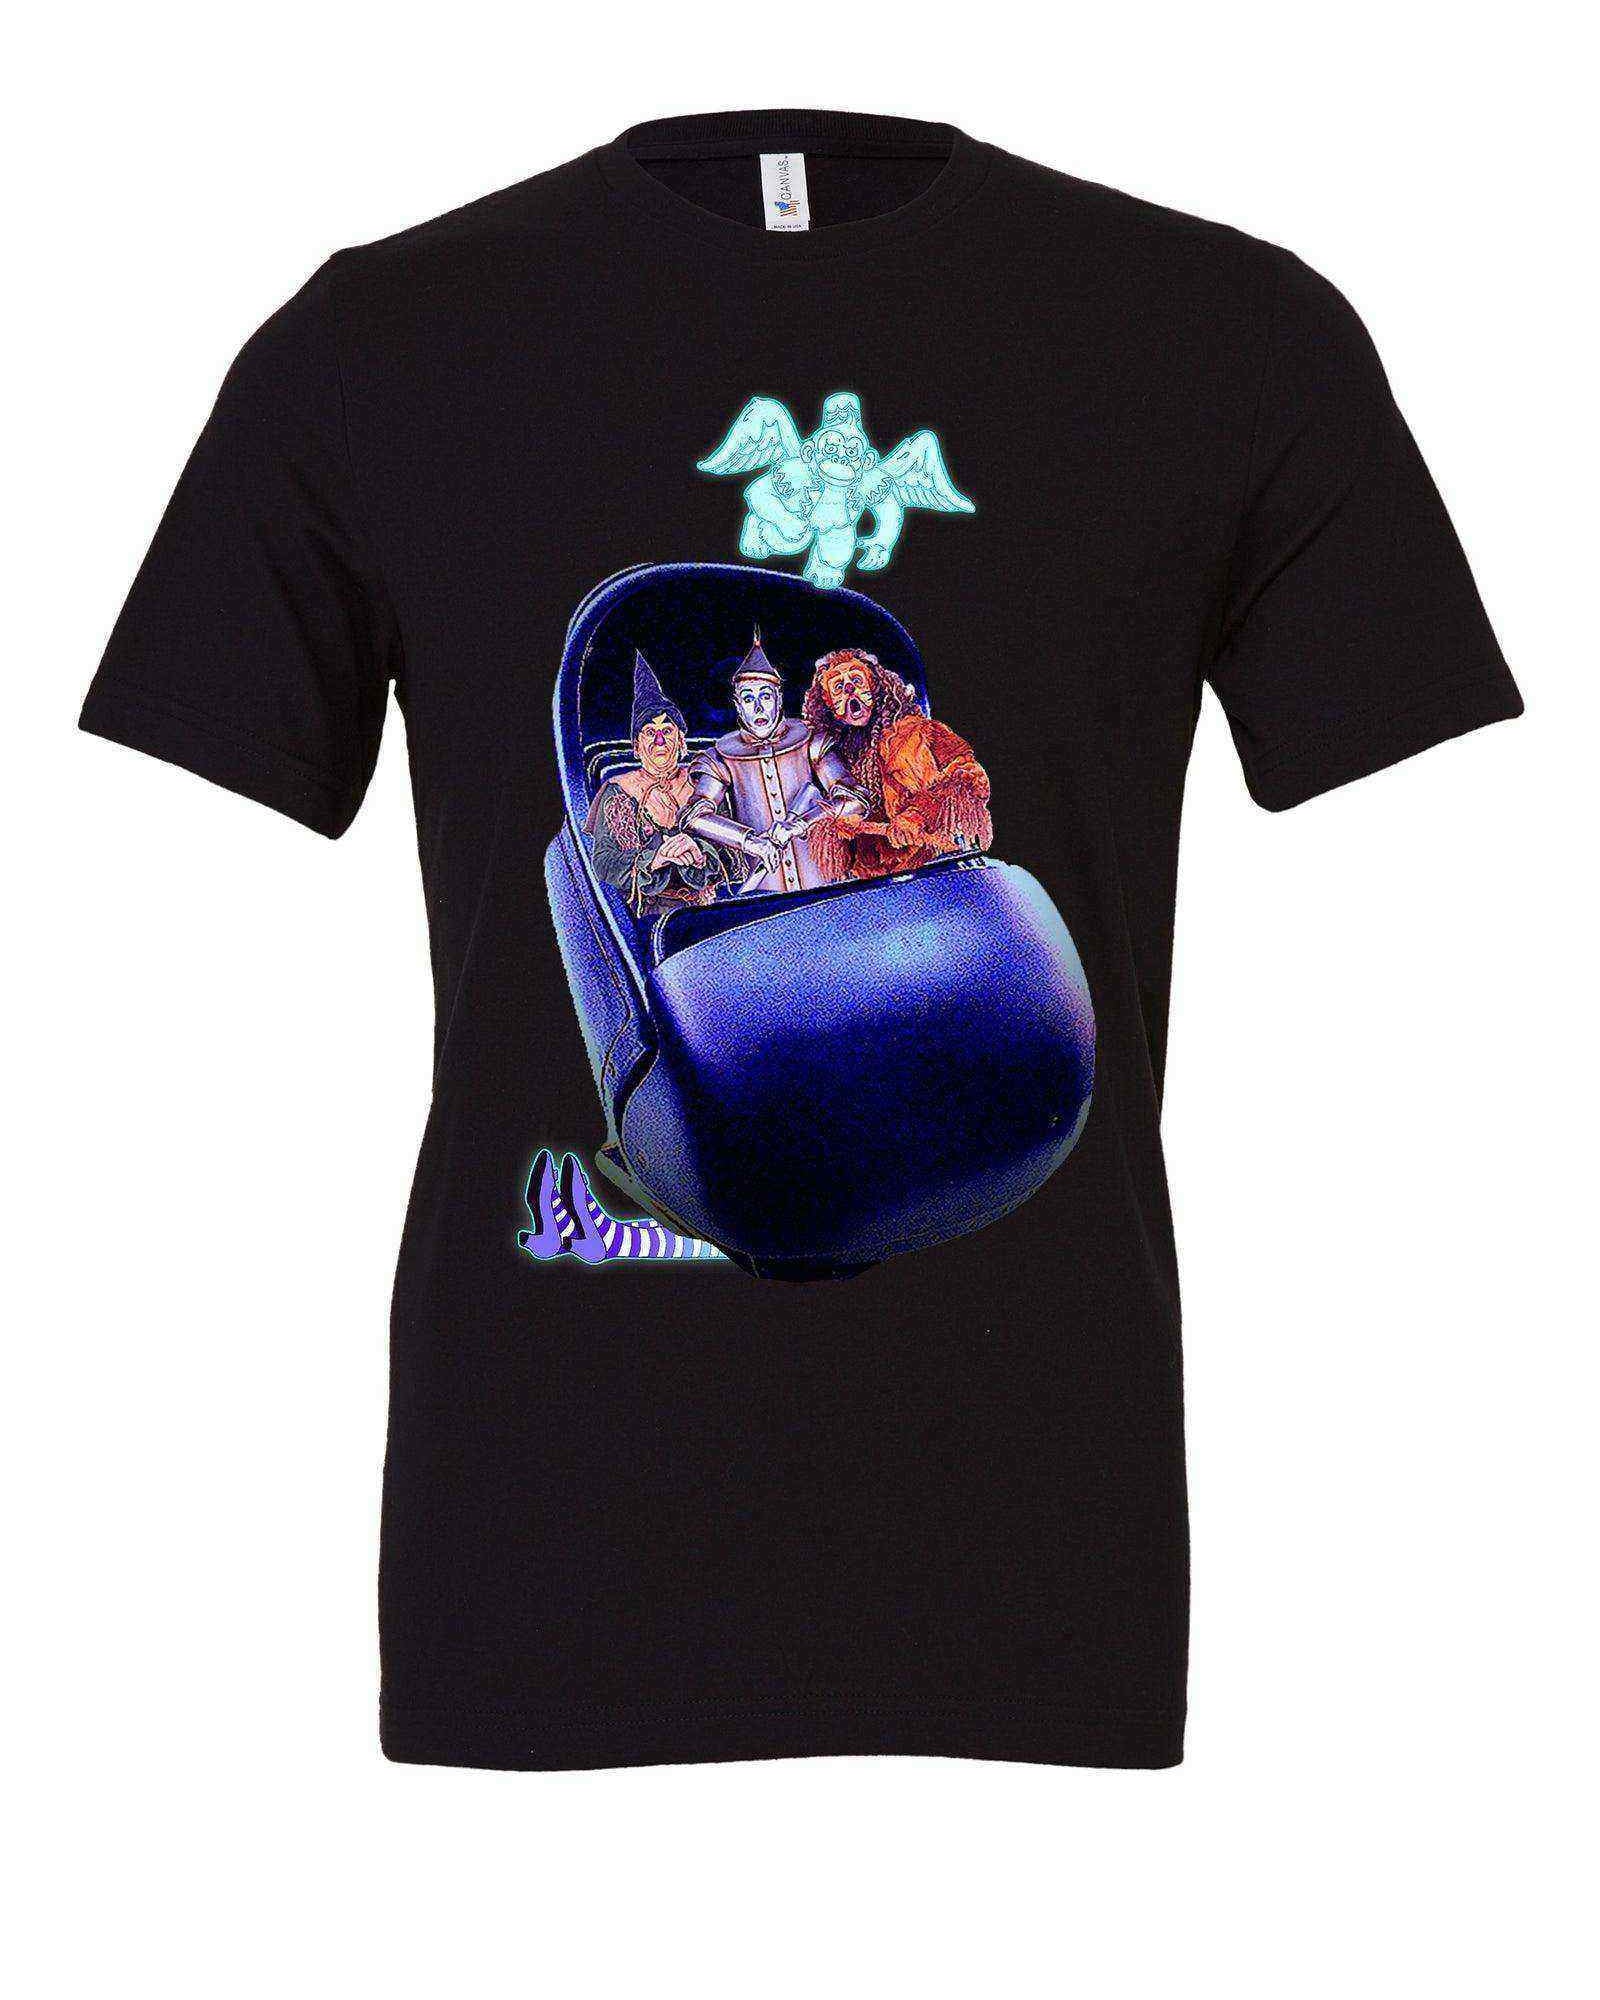 Haunted Mansion Wizard Of Oz Tee | Haunted Mansion Ride Tee I Wizard Of Oz Shirts - Dylan's Tees